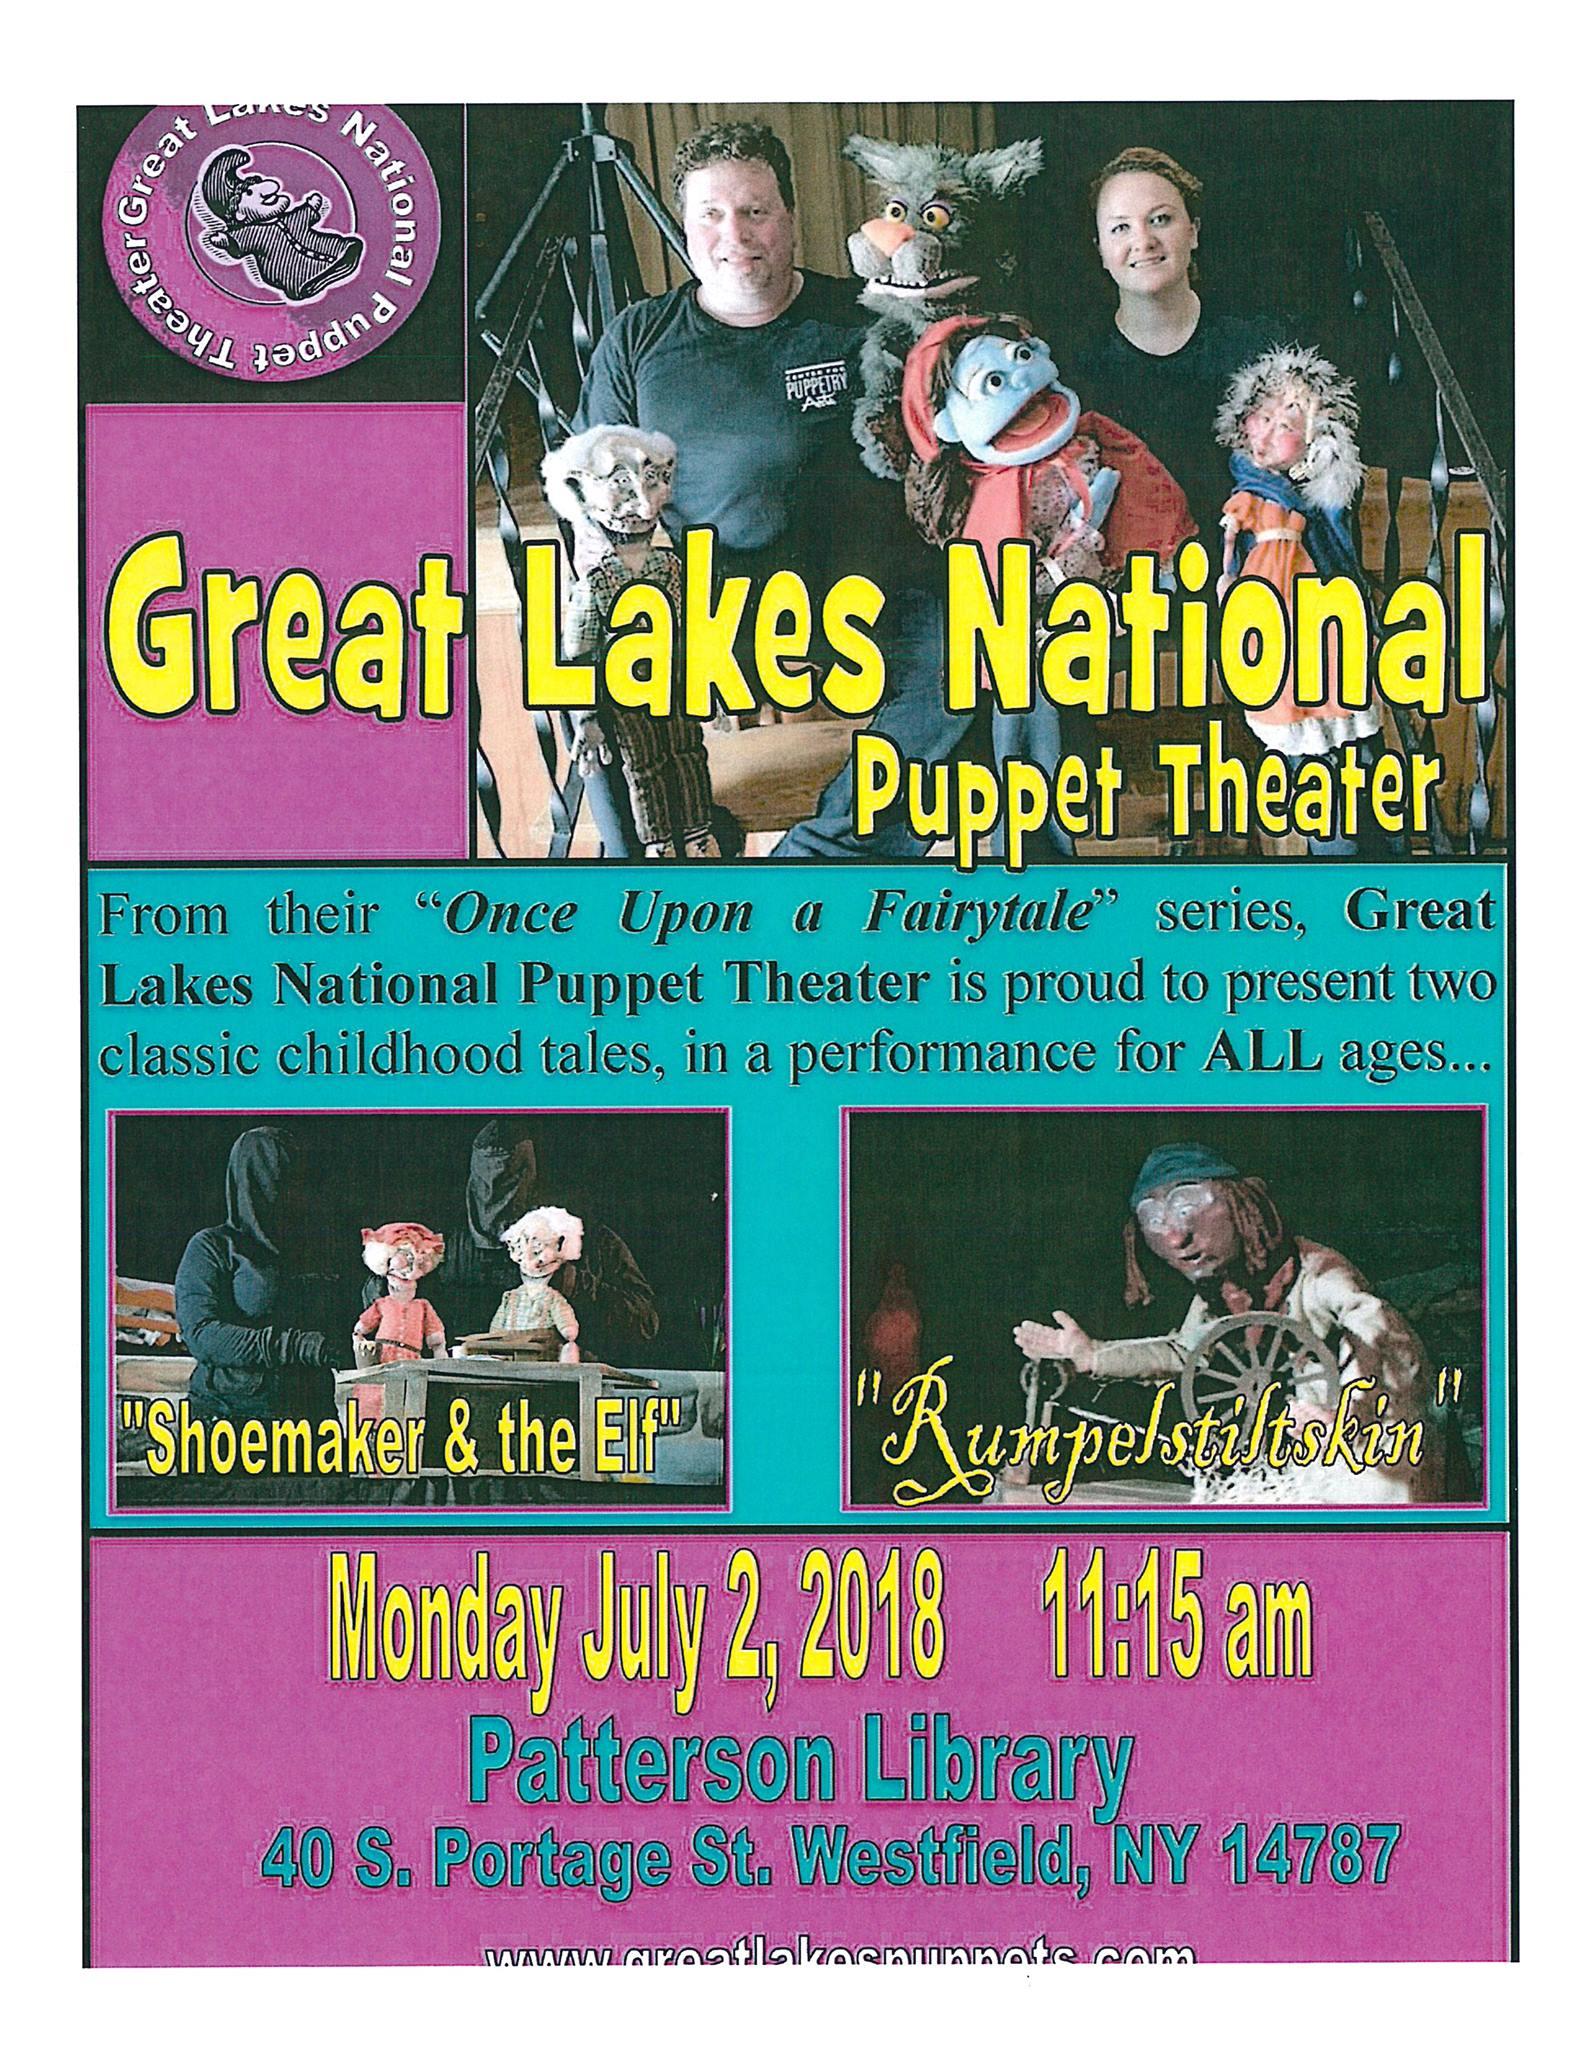 Great Lakes National Puppet Theater